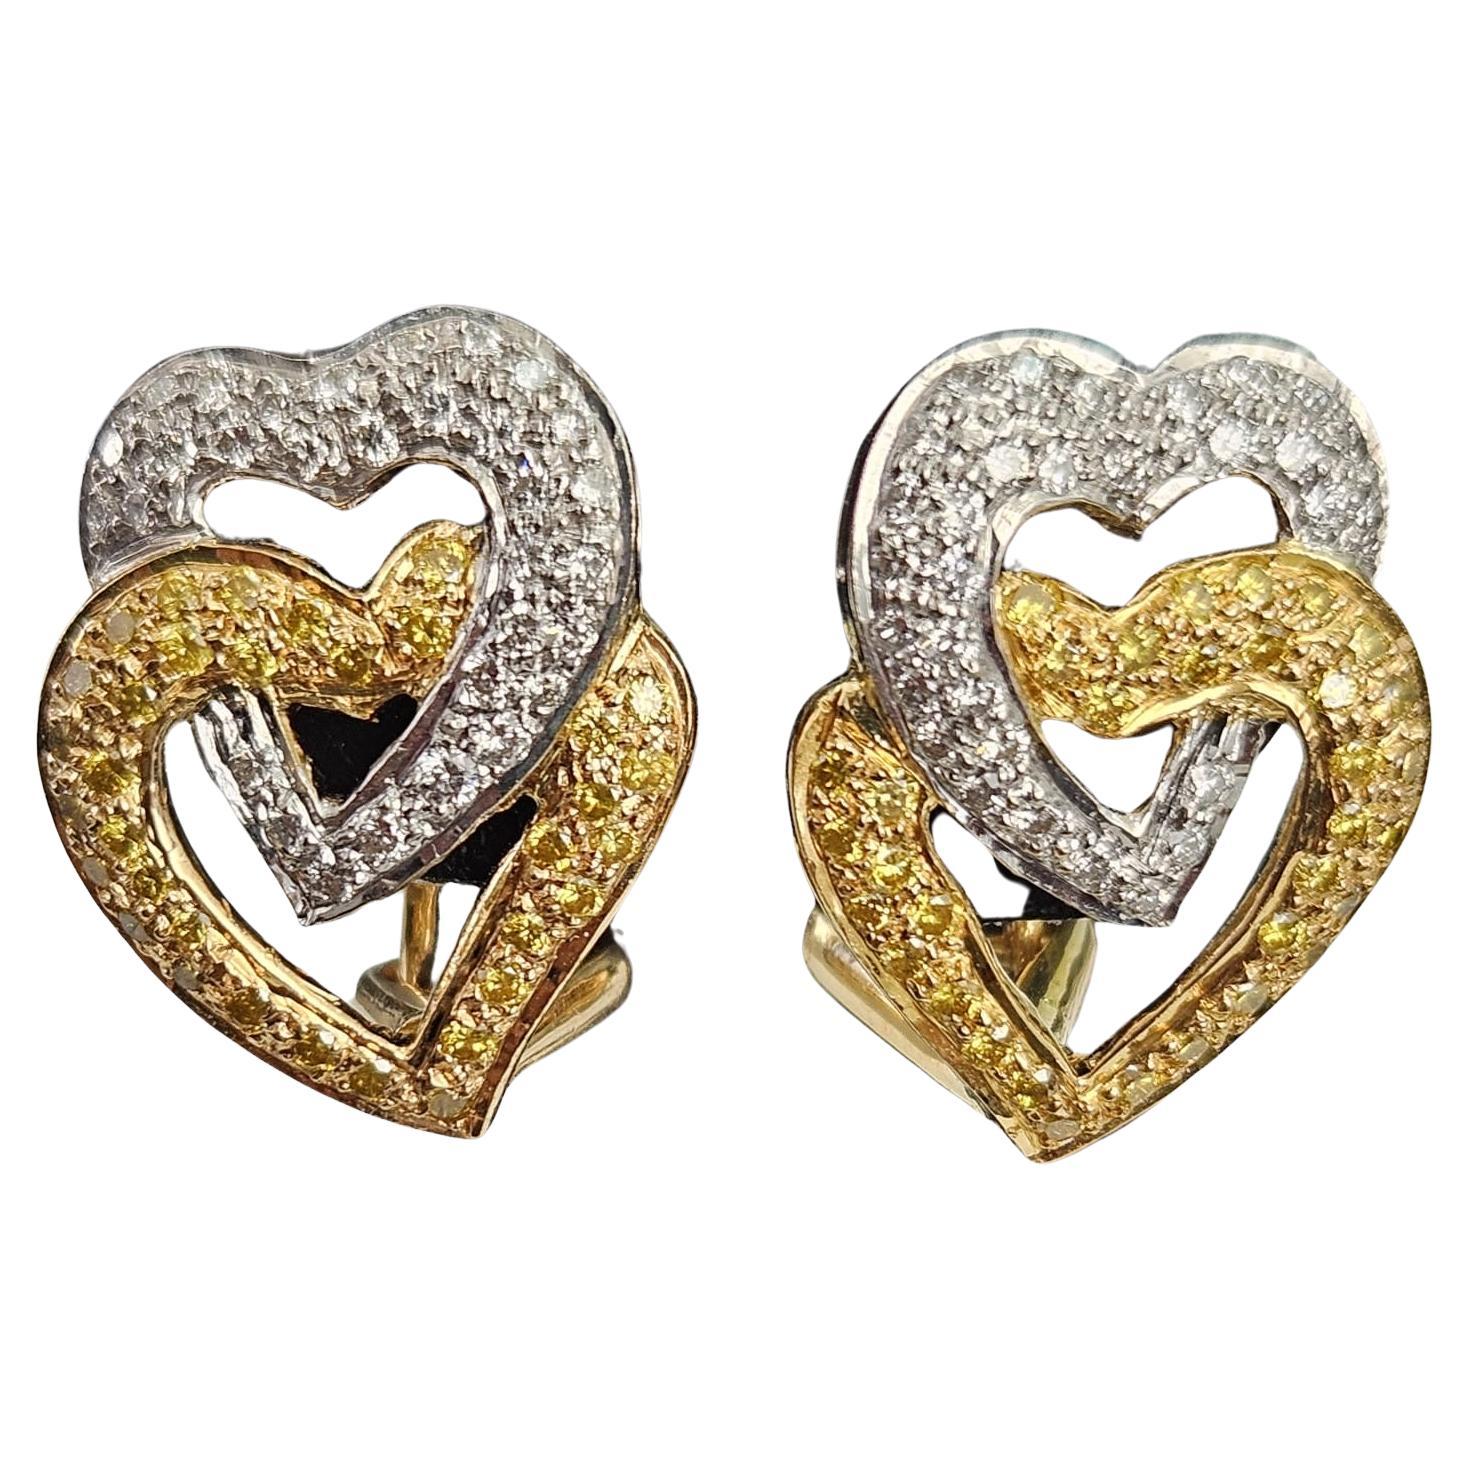 0.94 cts Canary and White Diamond Heart Earrings For Sale